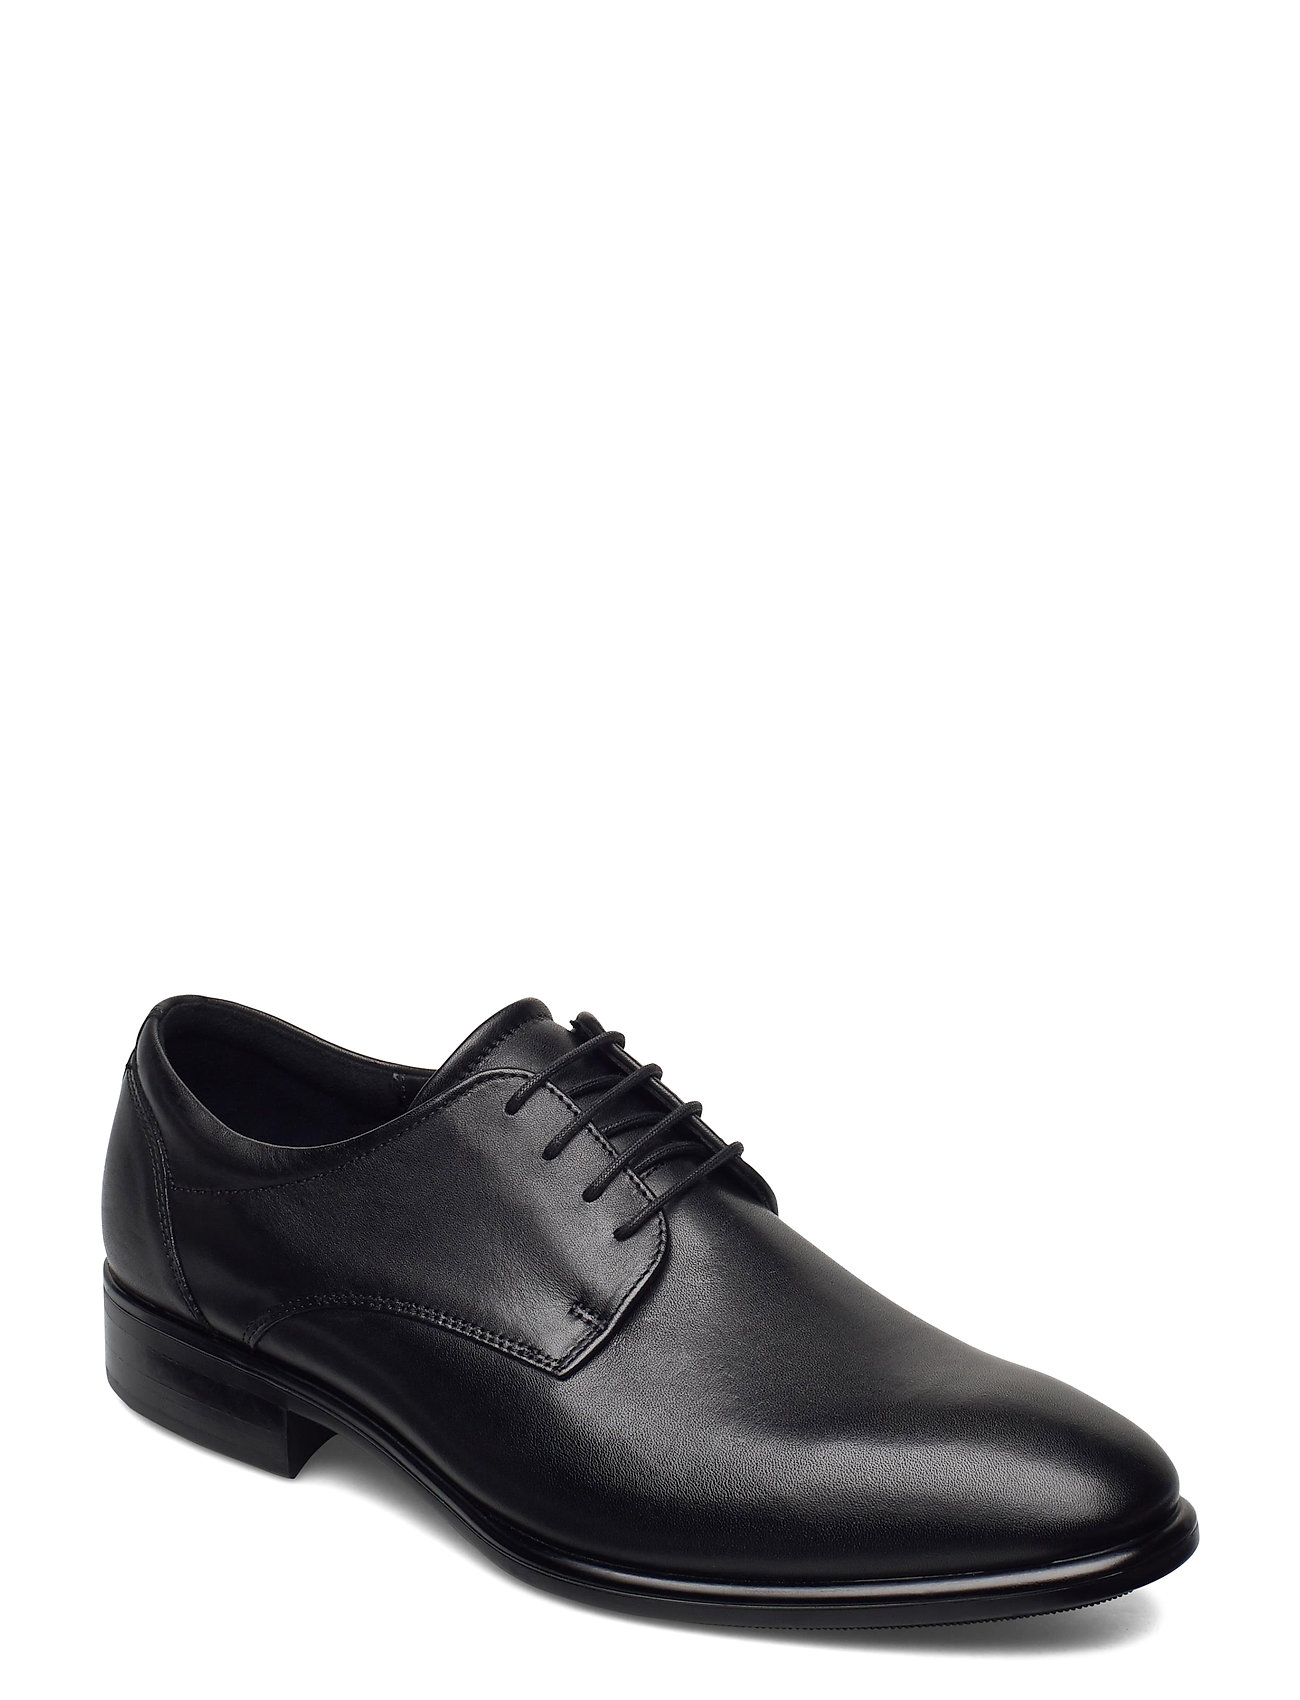 Citytray Shoes Business Laced Shoes Musta ECCO